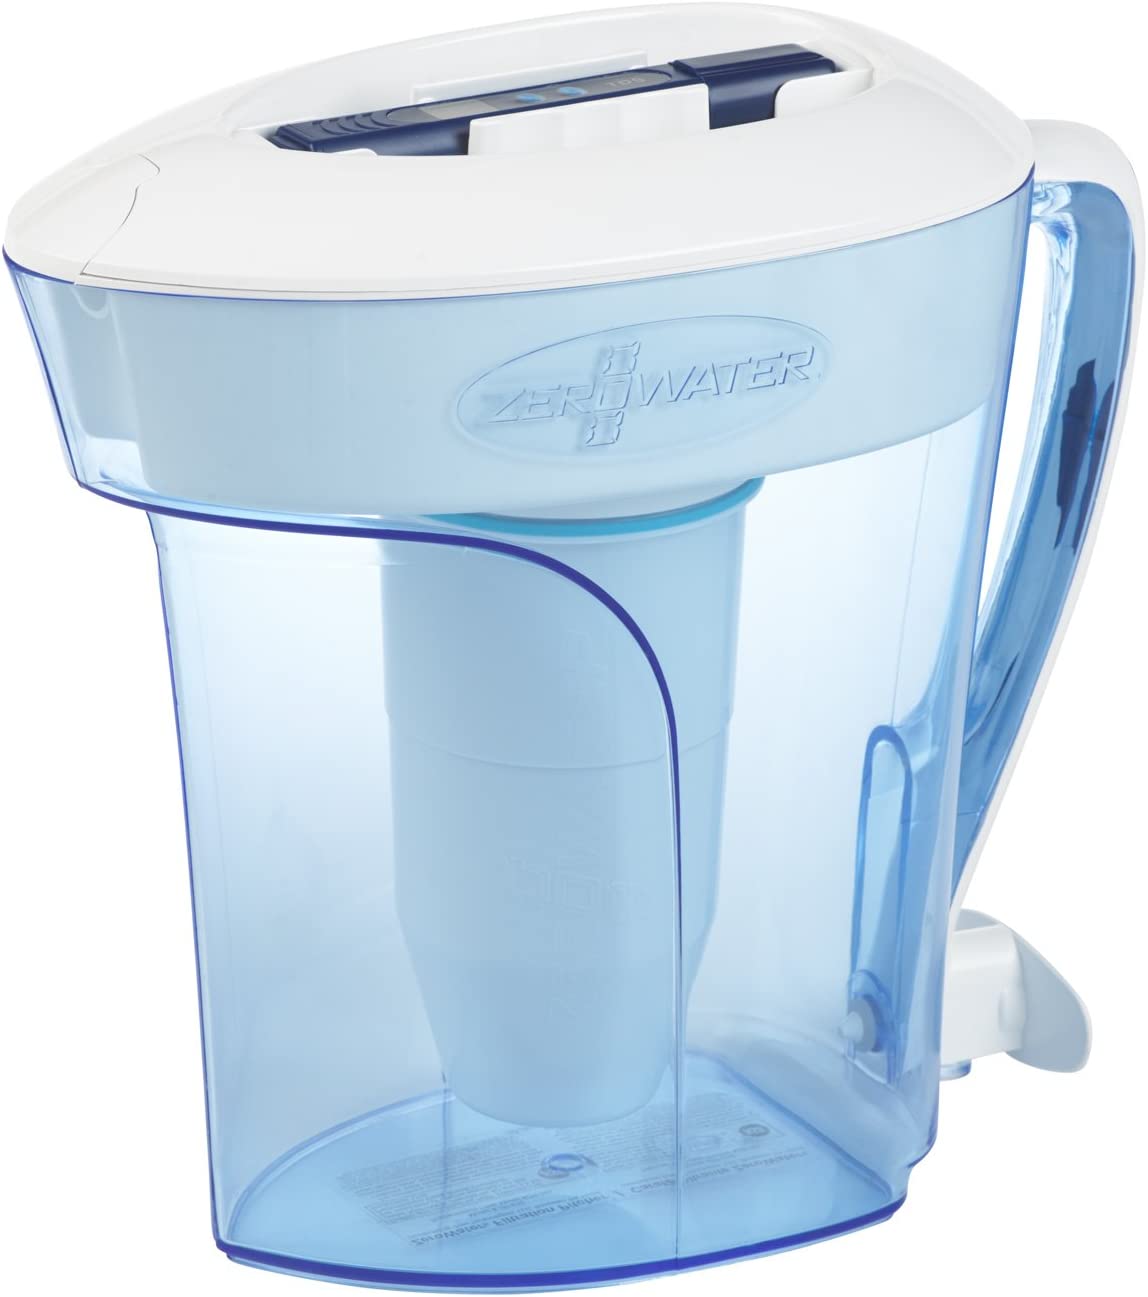 ZeroWater ZP-010, 10 Cup 5-Stage Water Filter Pitcher,NSF Certified to Reduce Lead, Other Heavy Metals and PFOA/PFOS, Blue and White